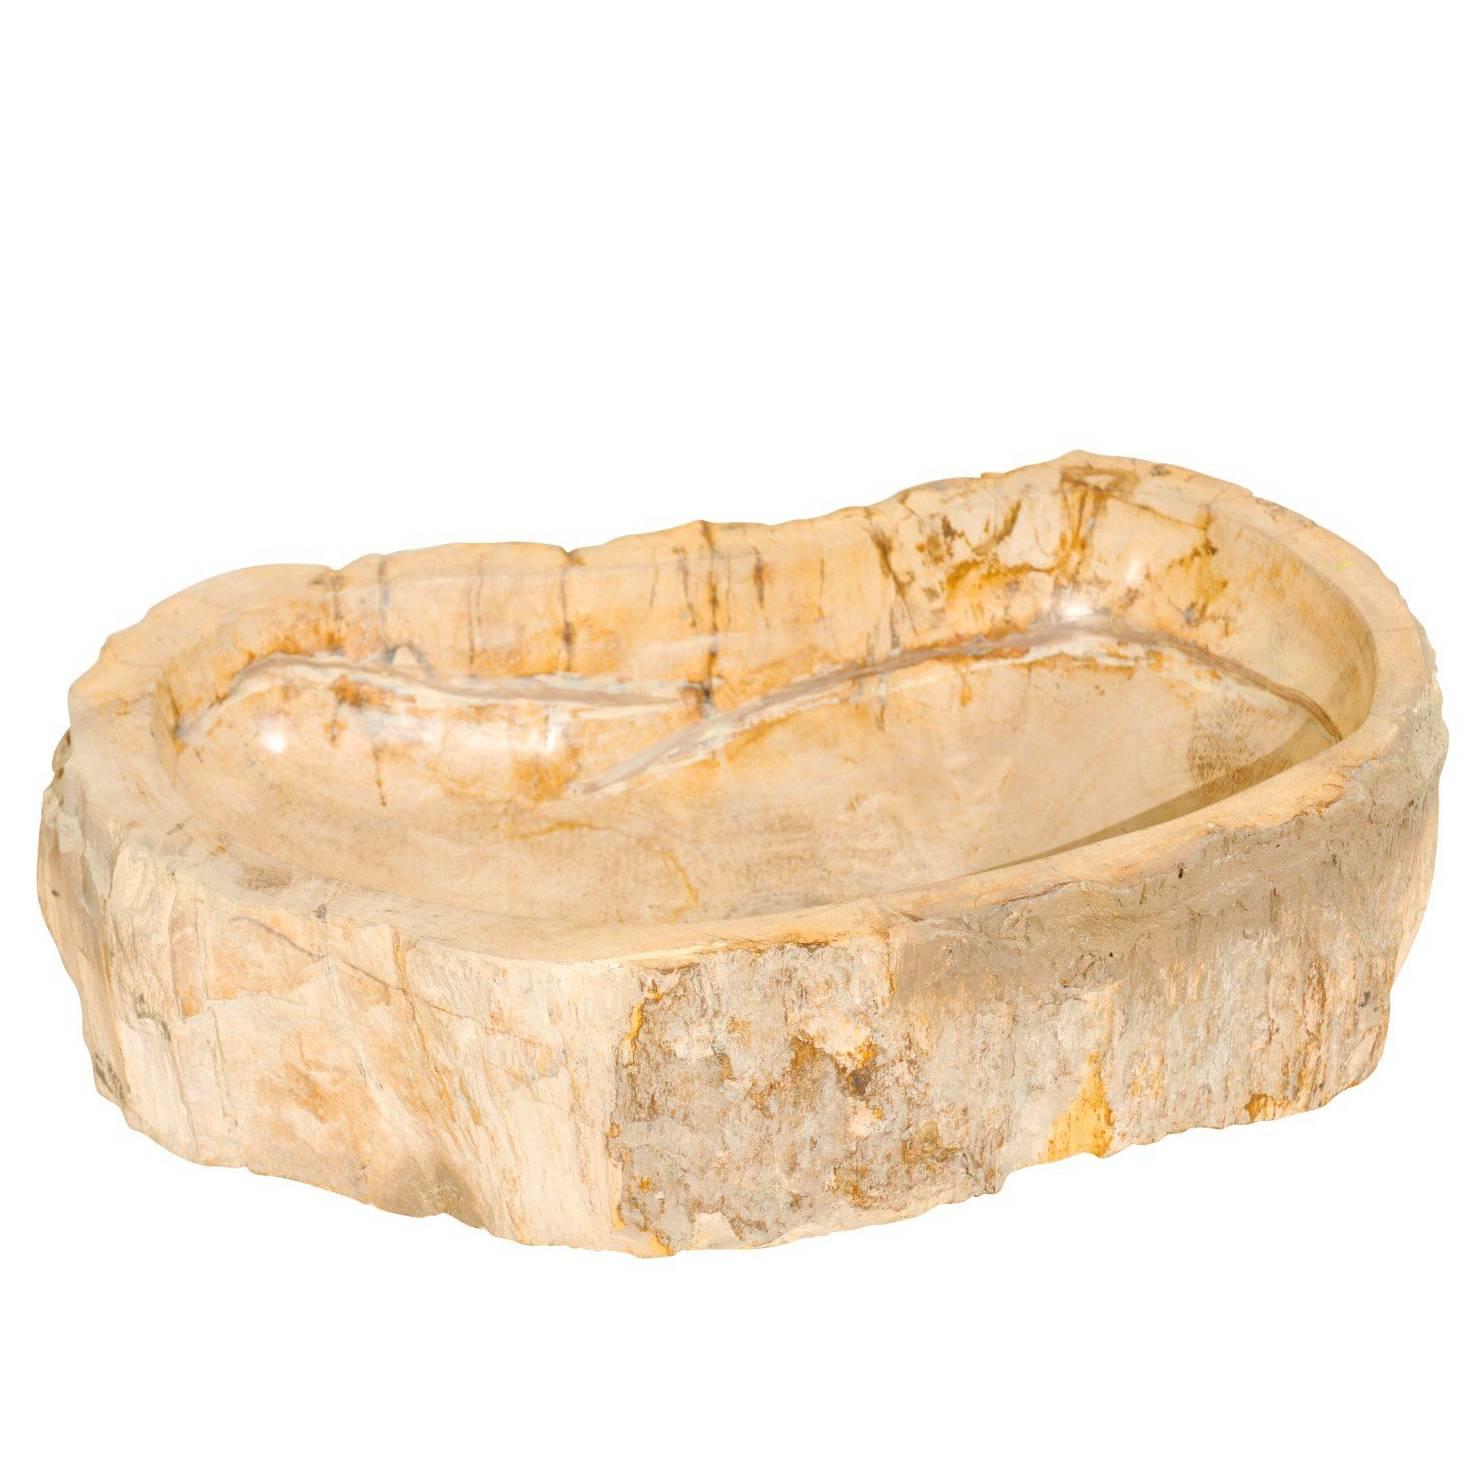 An Elegant Kidney-Shaped Polished Petrified Wood Sink with a Live-Edge Surround For Sale